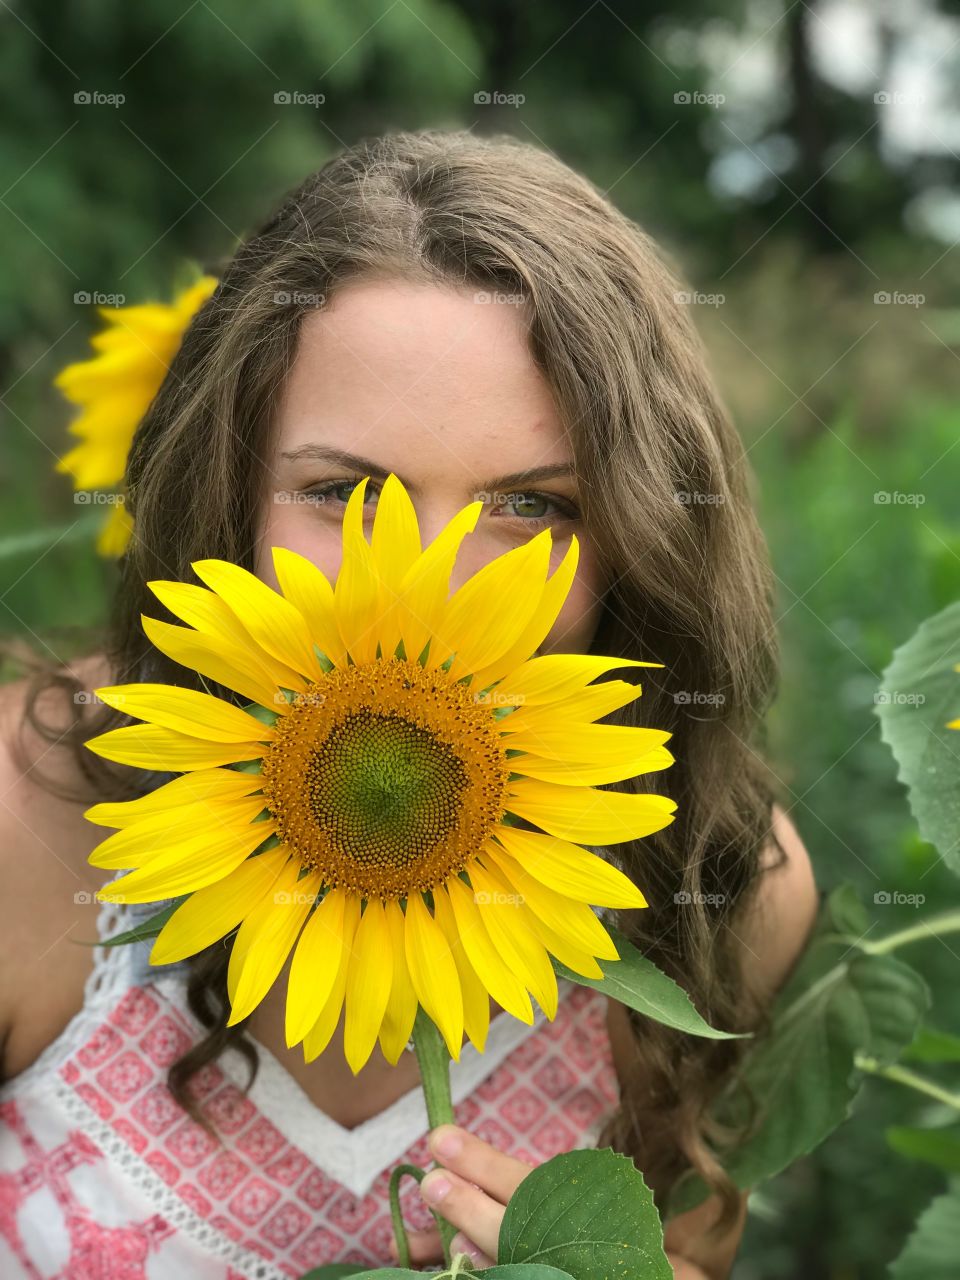 A girl and her sunflower 